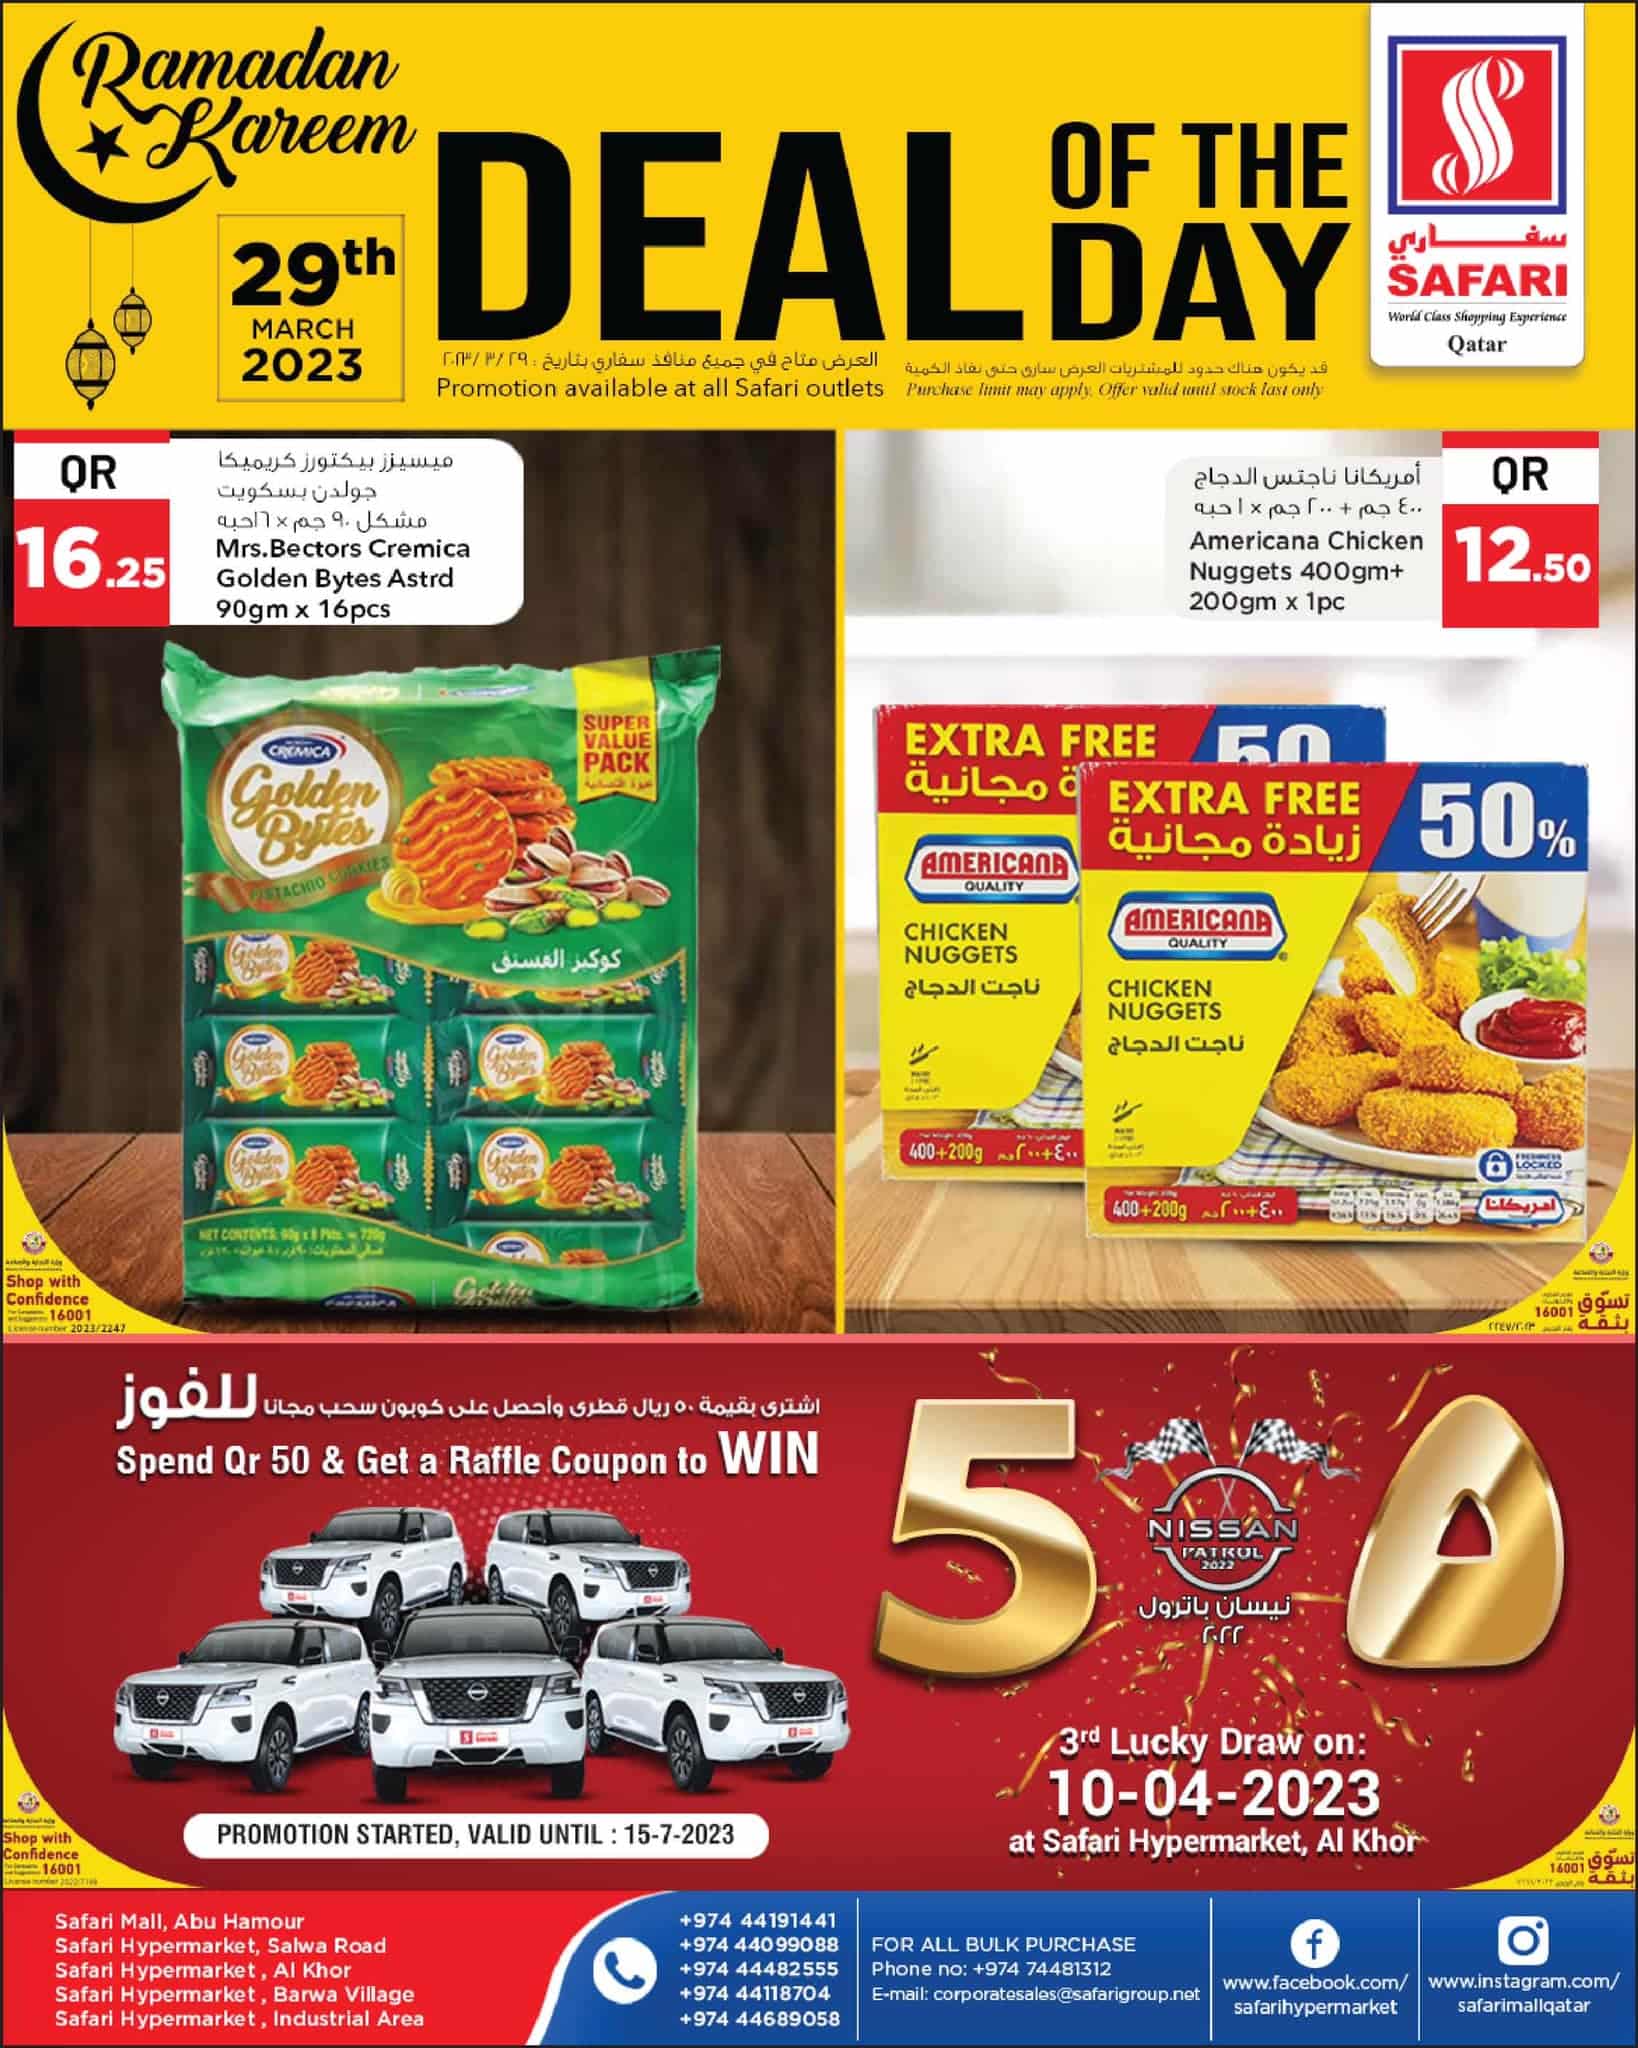 Safari Offers deals of the day